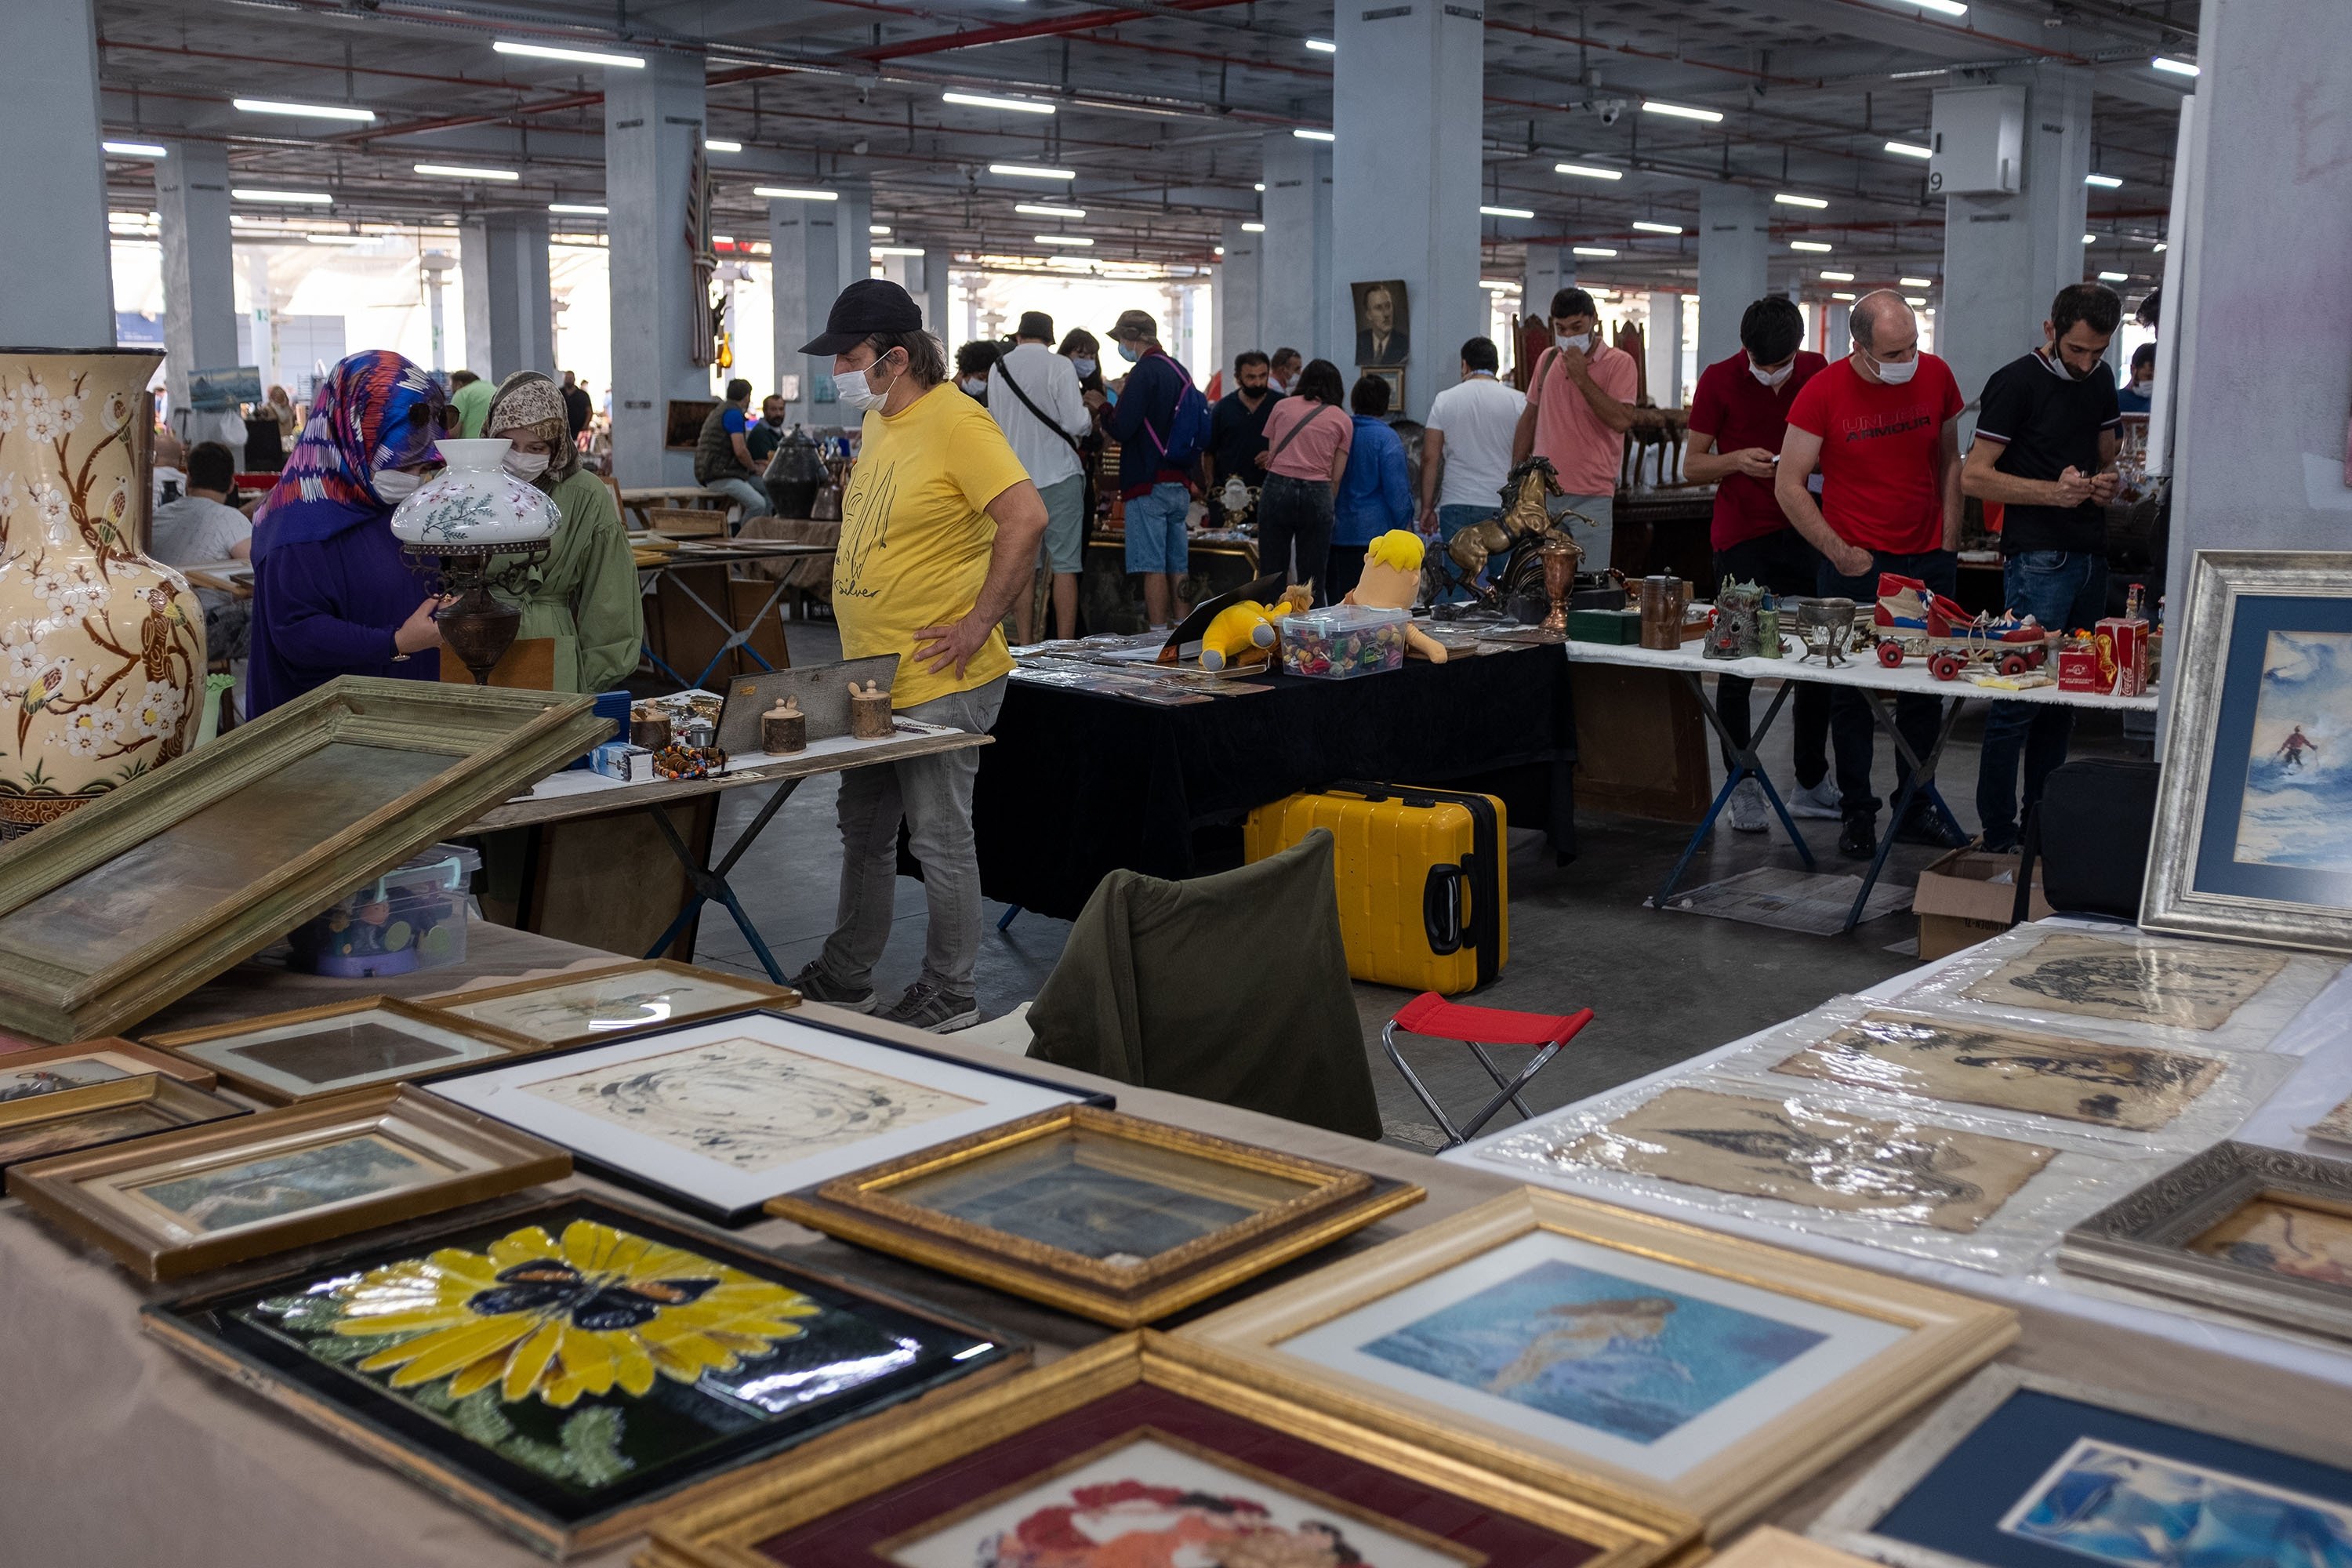 The Feriköy bazaar, the largest antiques bazaar of Istanbul, Turkey seen on September 27, 2020. (Getty Images)